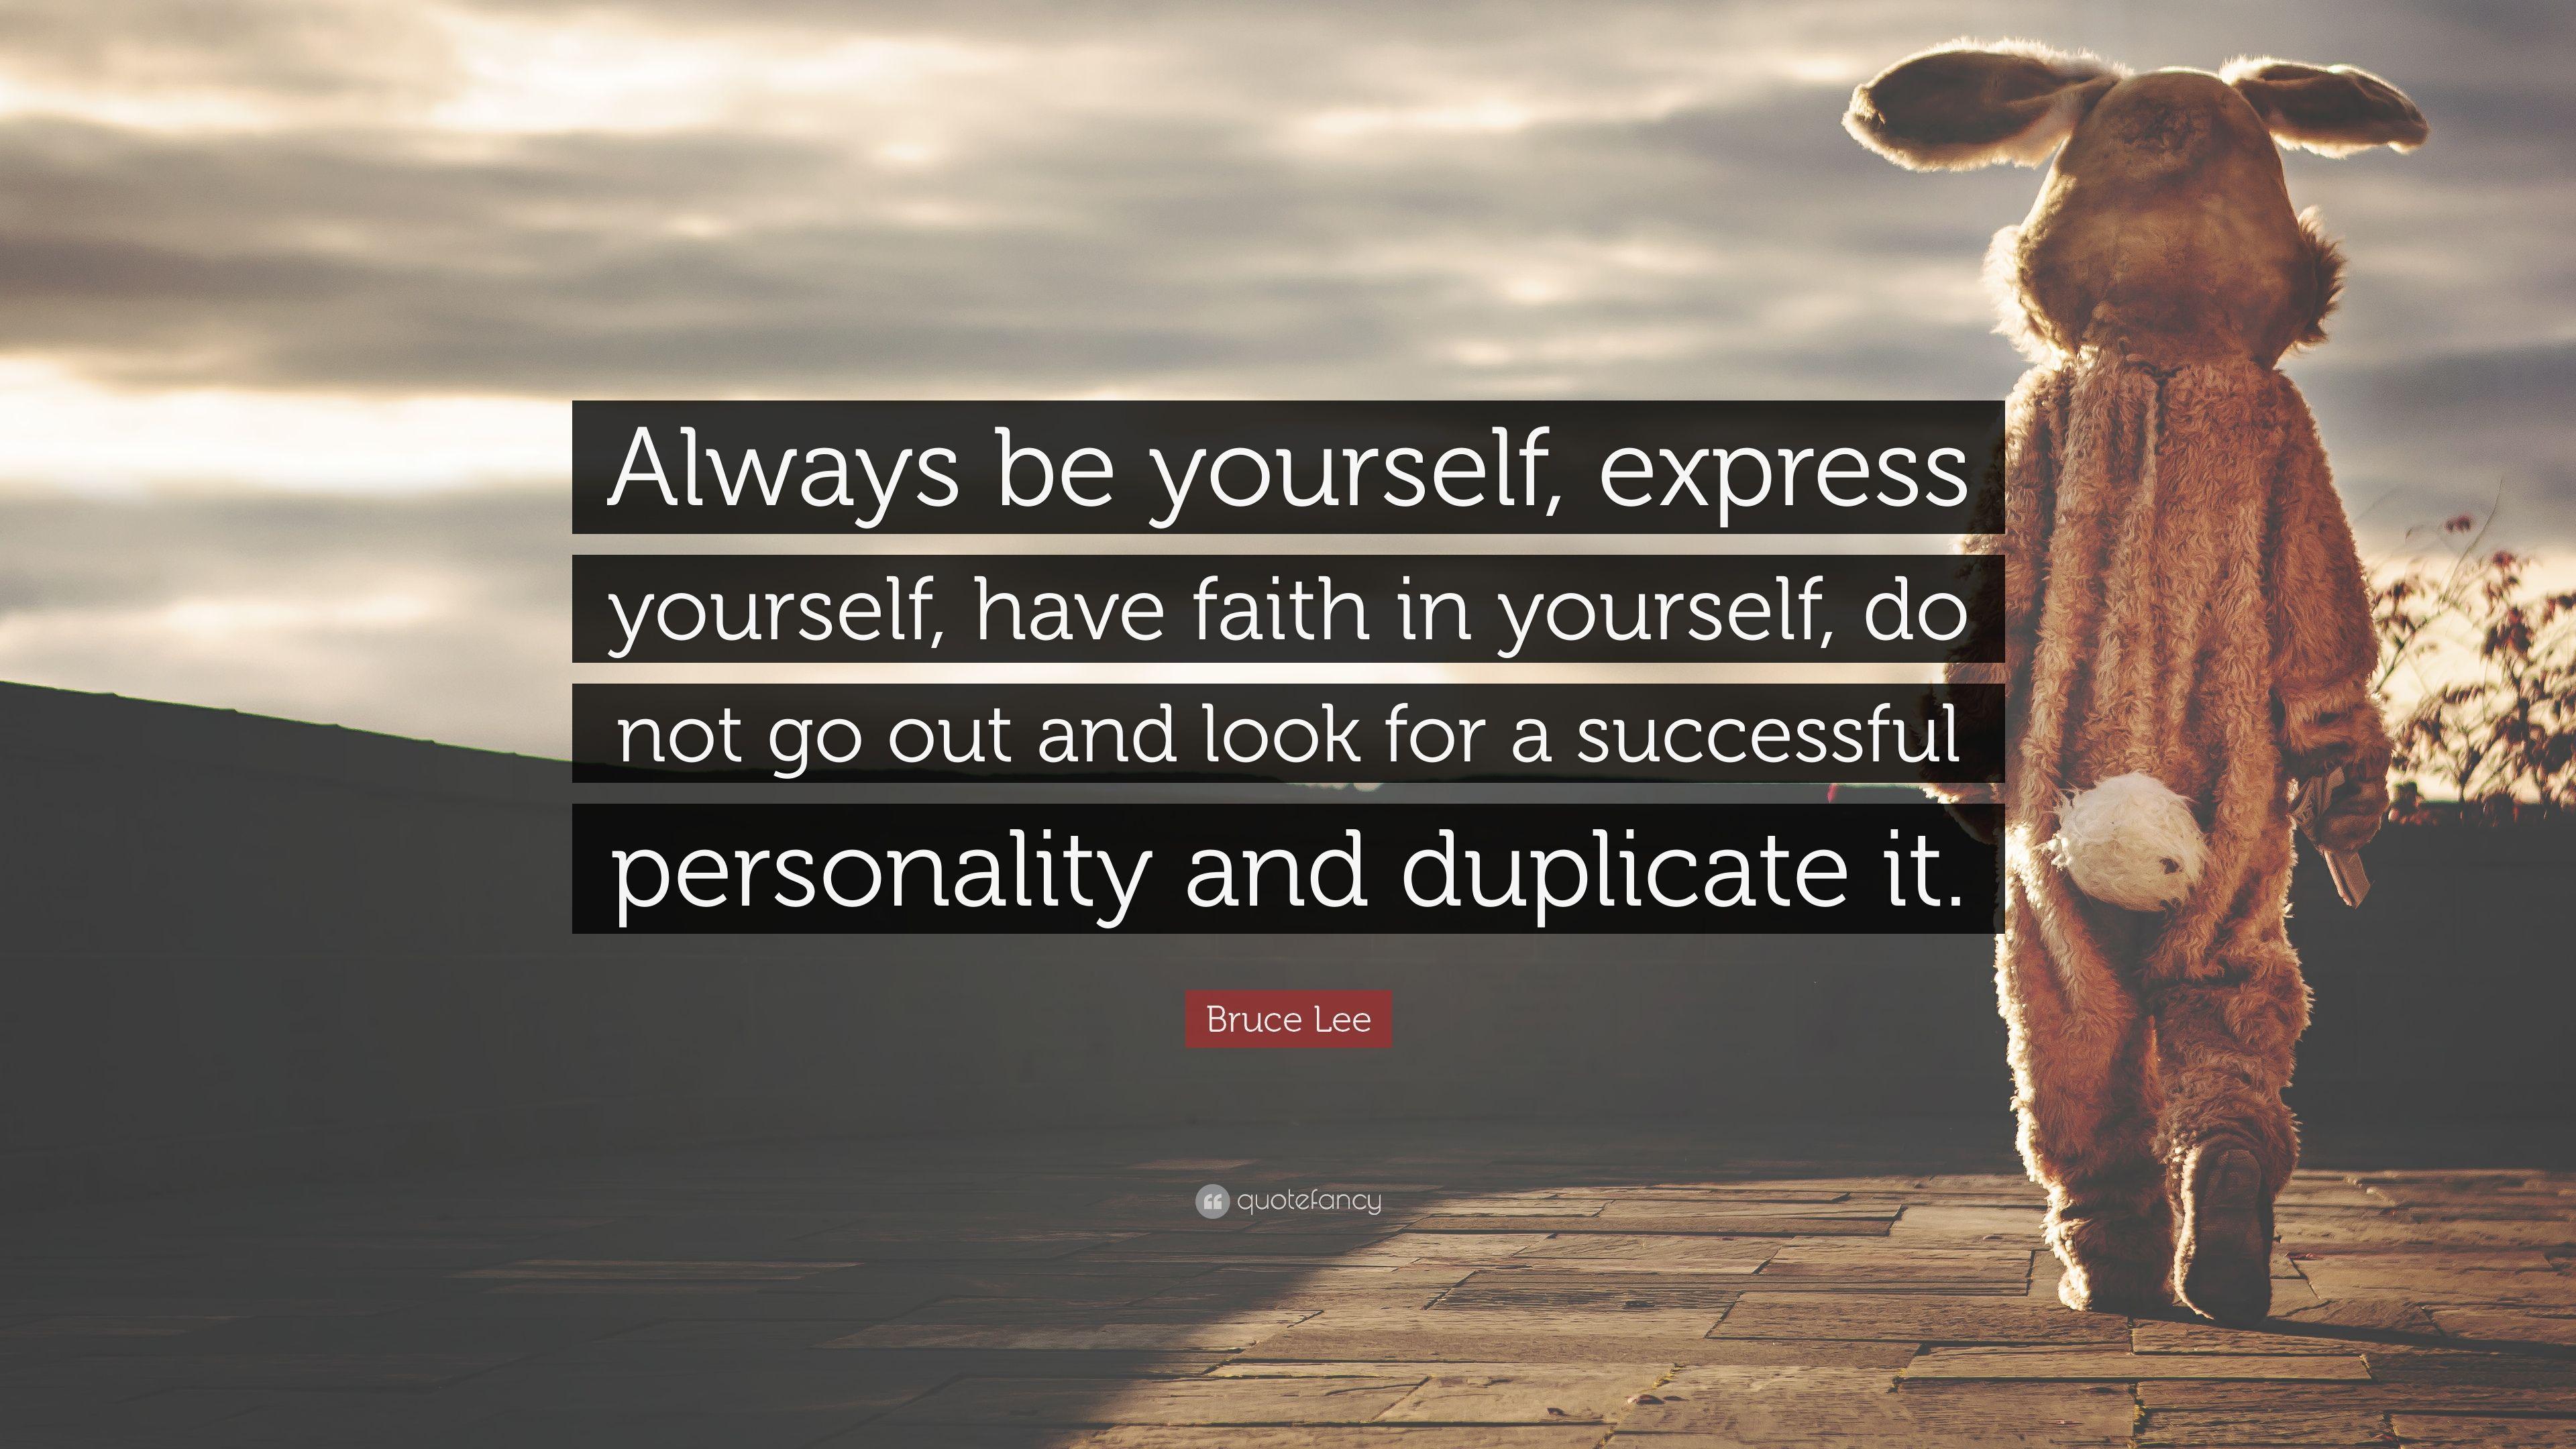 Bruce Lee Quote: “Always be yourself, express yourself, have faith